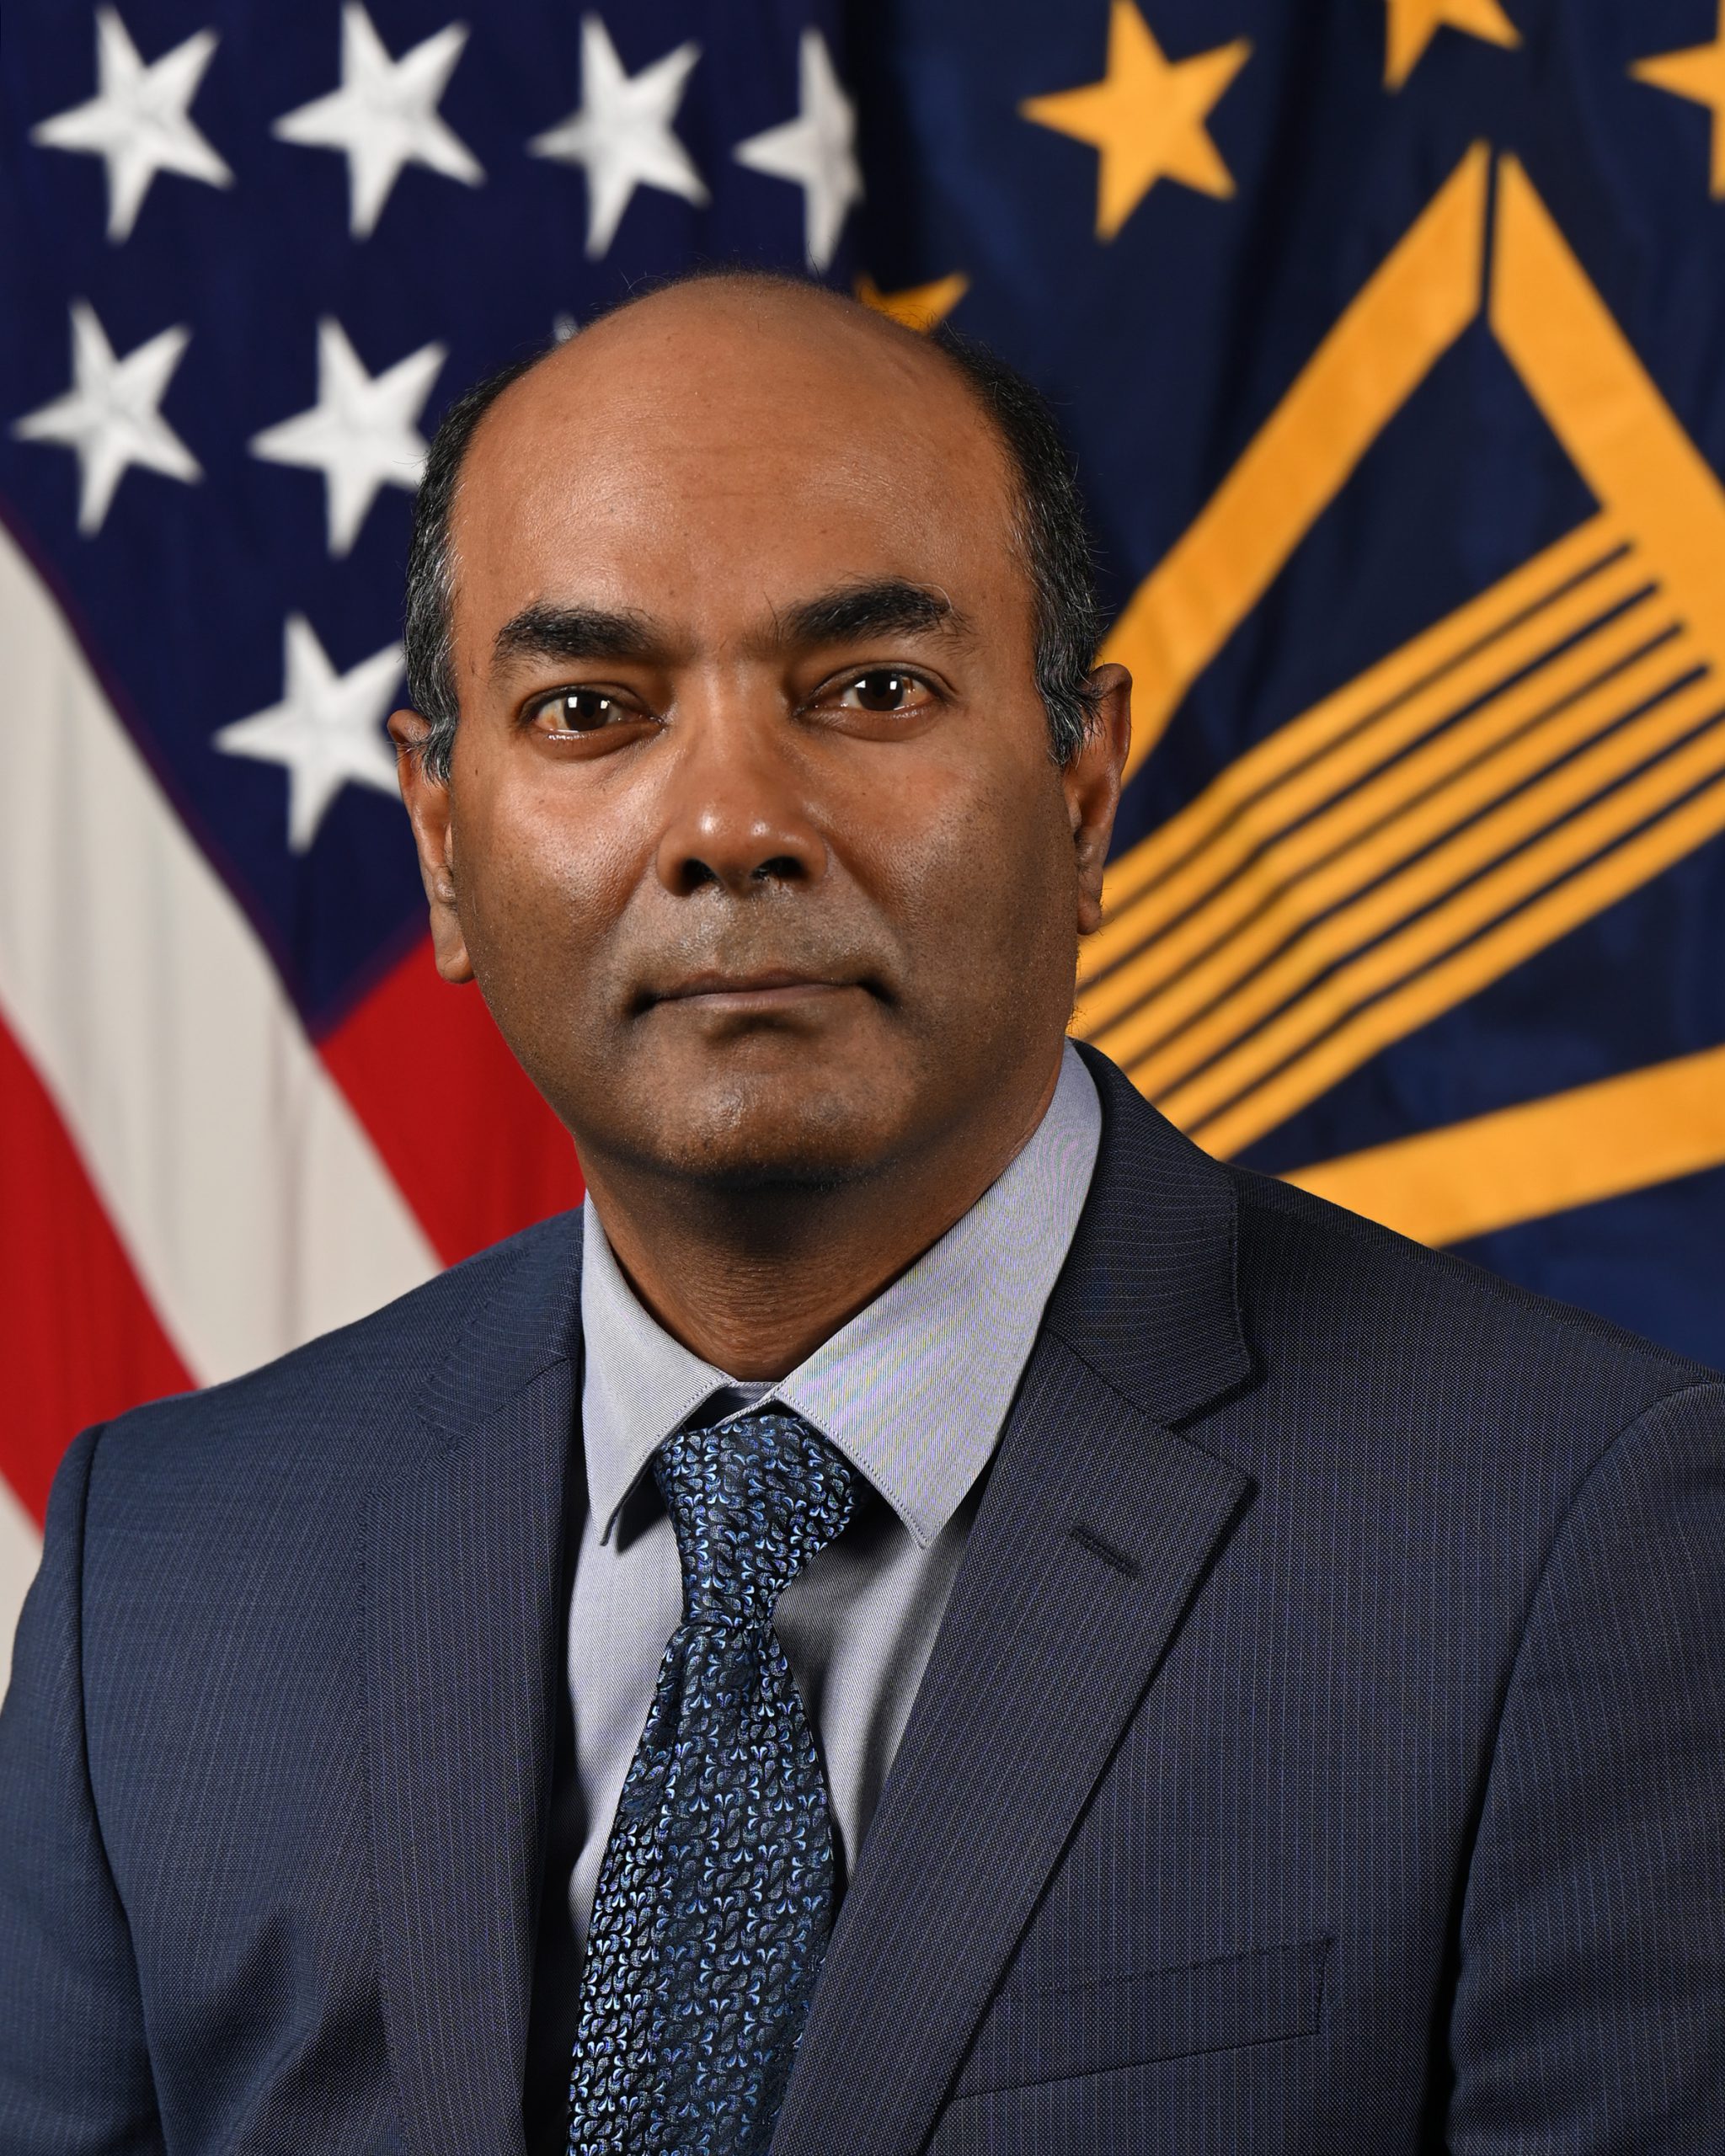 Mr. Jagedeesh Pamulapati oposes for his official portrait in the Army portrait studio at the Pentagon in Arlington, Va, Mar. 08, 2022.  (U.S. Army photo by Leonard Fitzgerald)